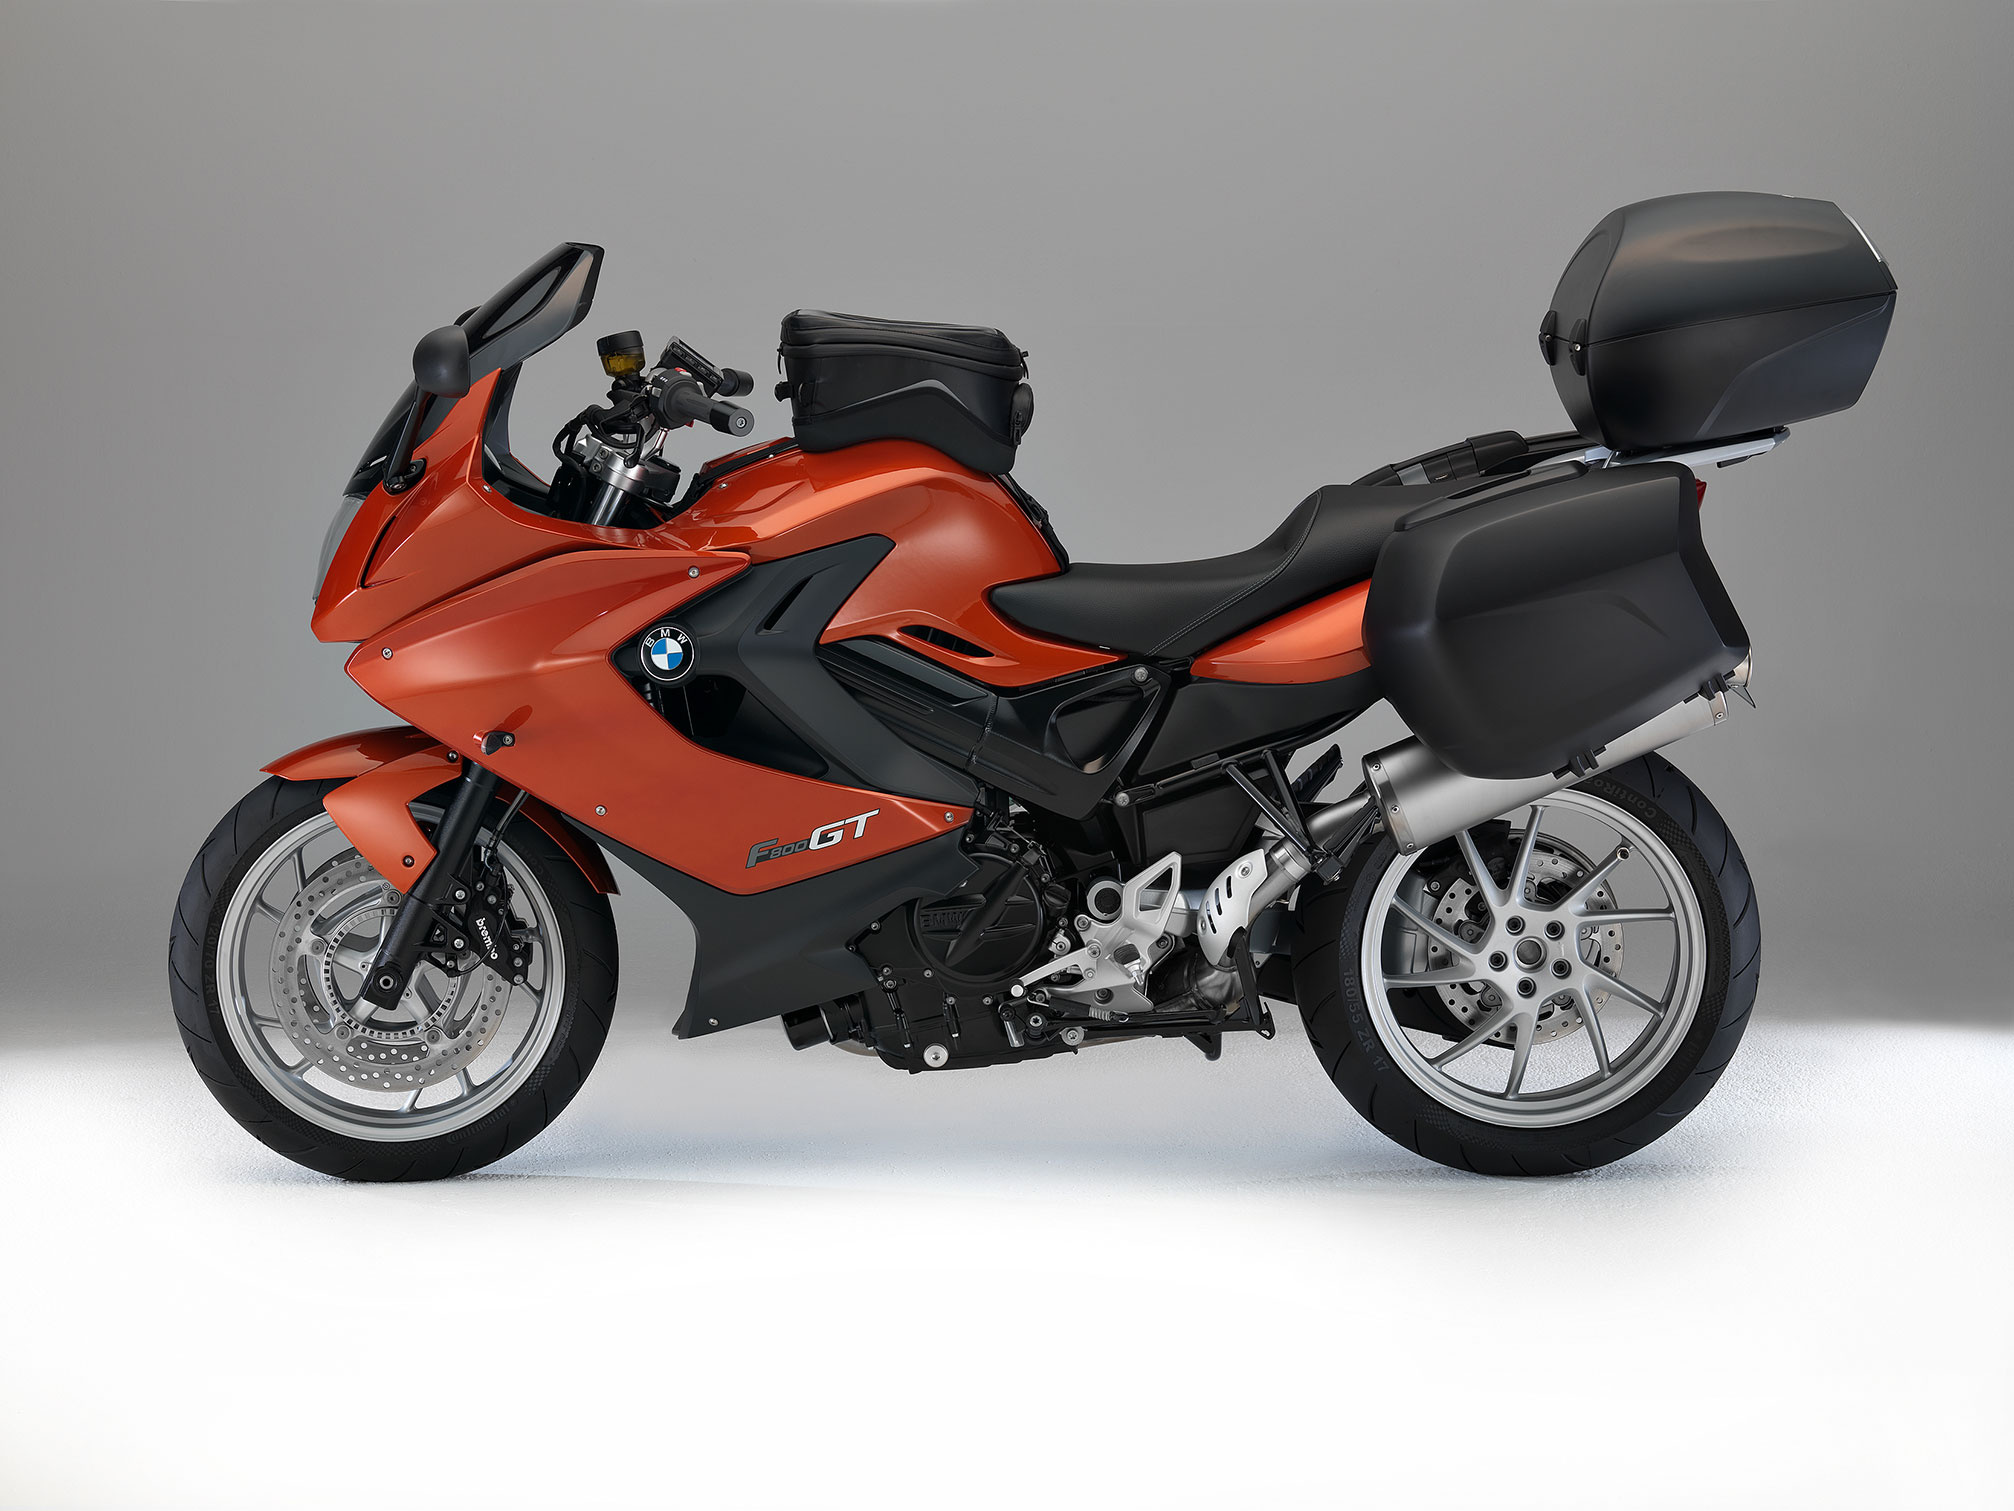 BMW F 800 GT, Sport touring motorcycle, Dynamic riding experience, Unmatched performance, 2020x1520 HD Desktop